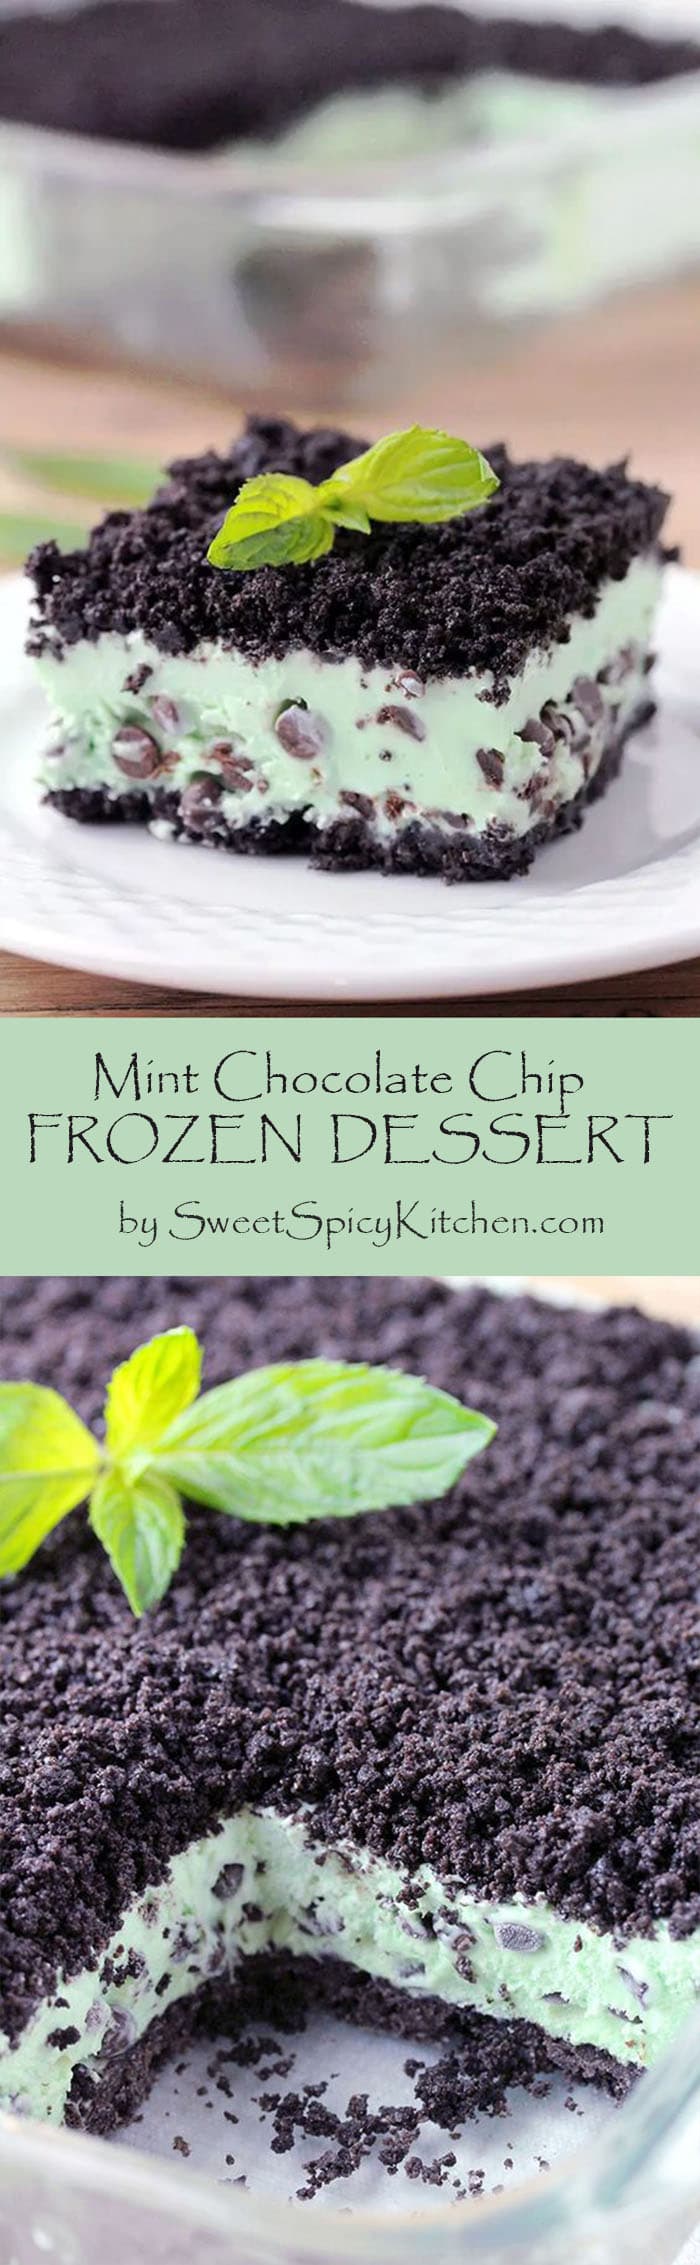 Mint Chocolate Chip Frozen Dessert – Oreo layer, mint chocolate chips filling, all topped with Oreo crumbs make this dessert amazing. This frozen, refreshing mint dessert is so easy to prepare.